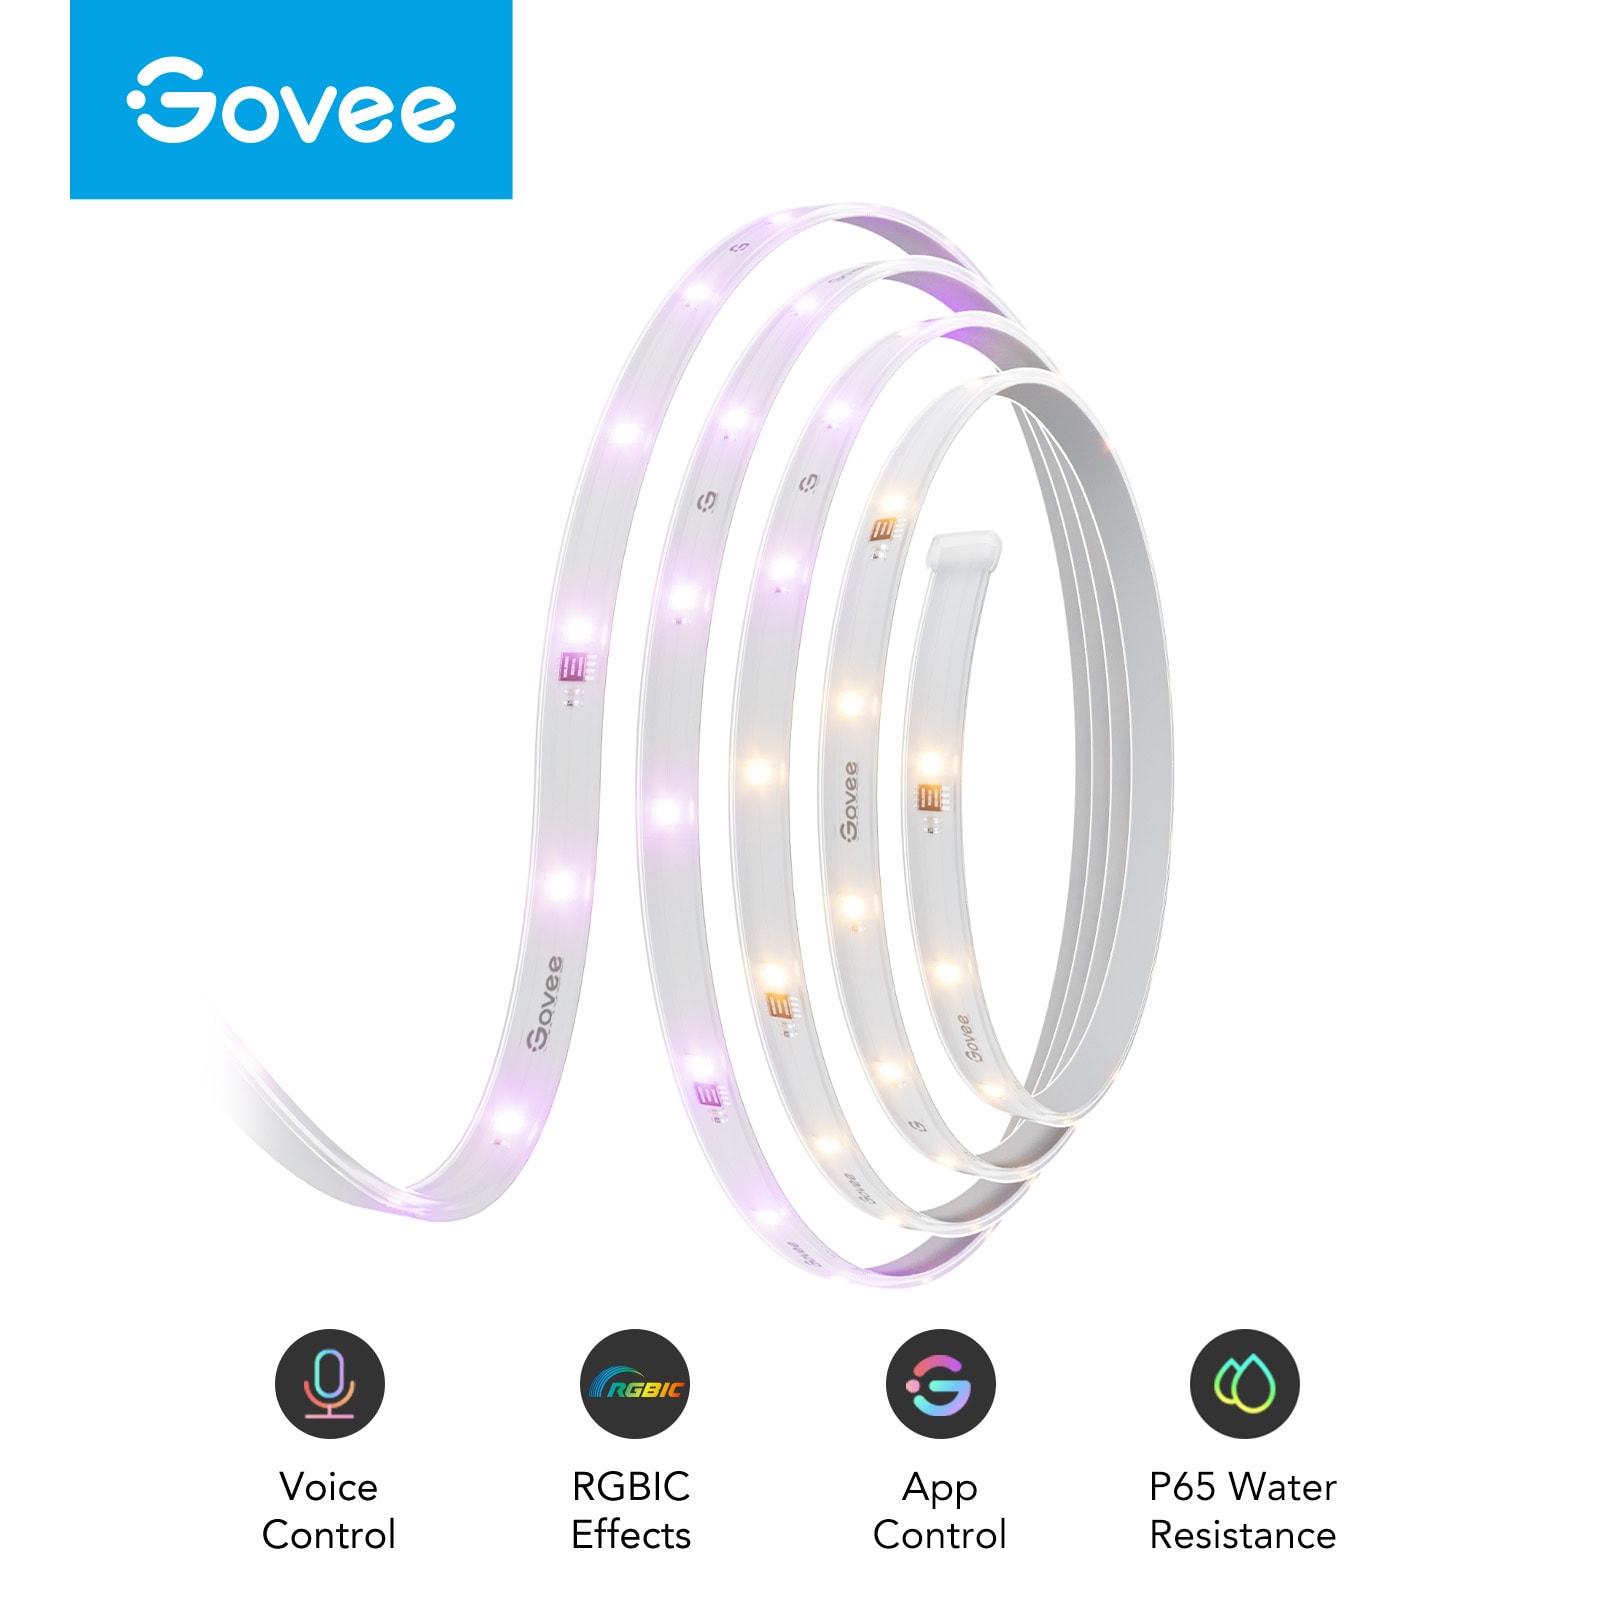 Govee LED Strip Lights RGBIC, 16.4ft Bluetooth Color Changing Lights with  Segmented App Control, Music Sync (Plastic,Adopter)